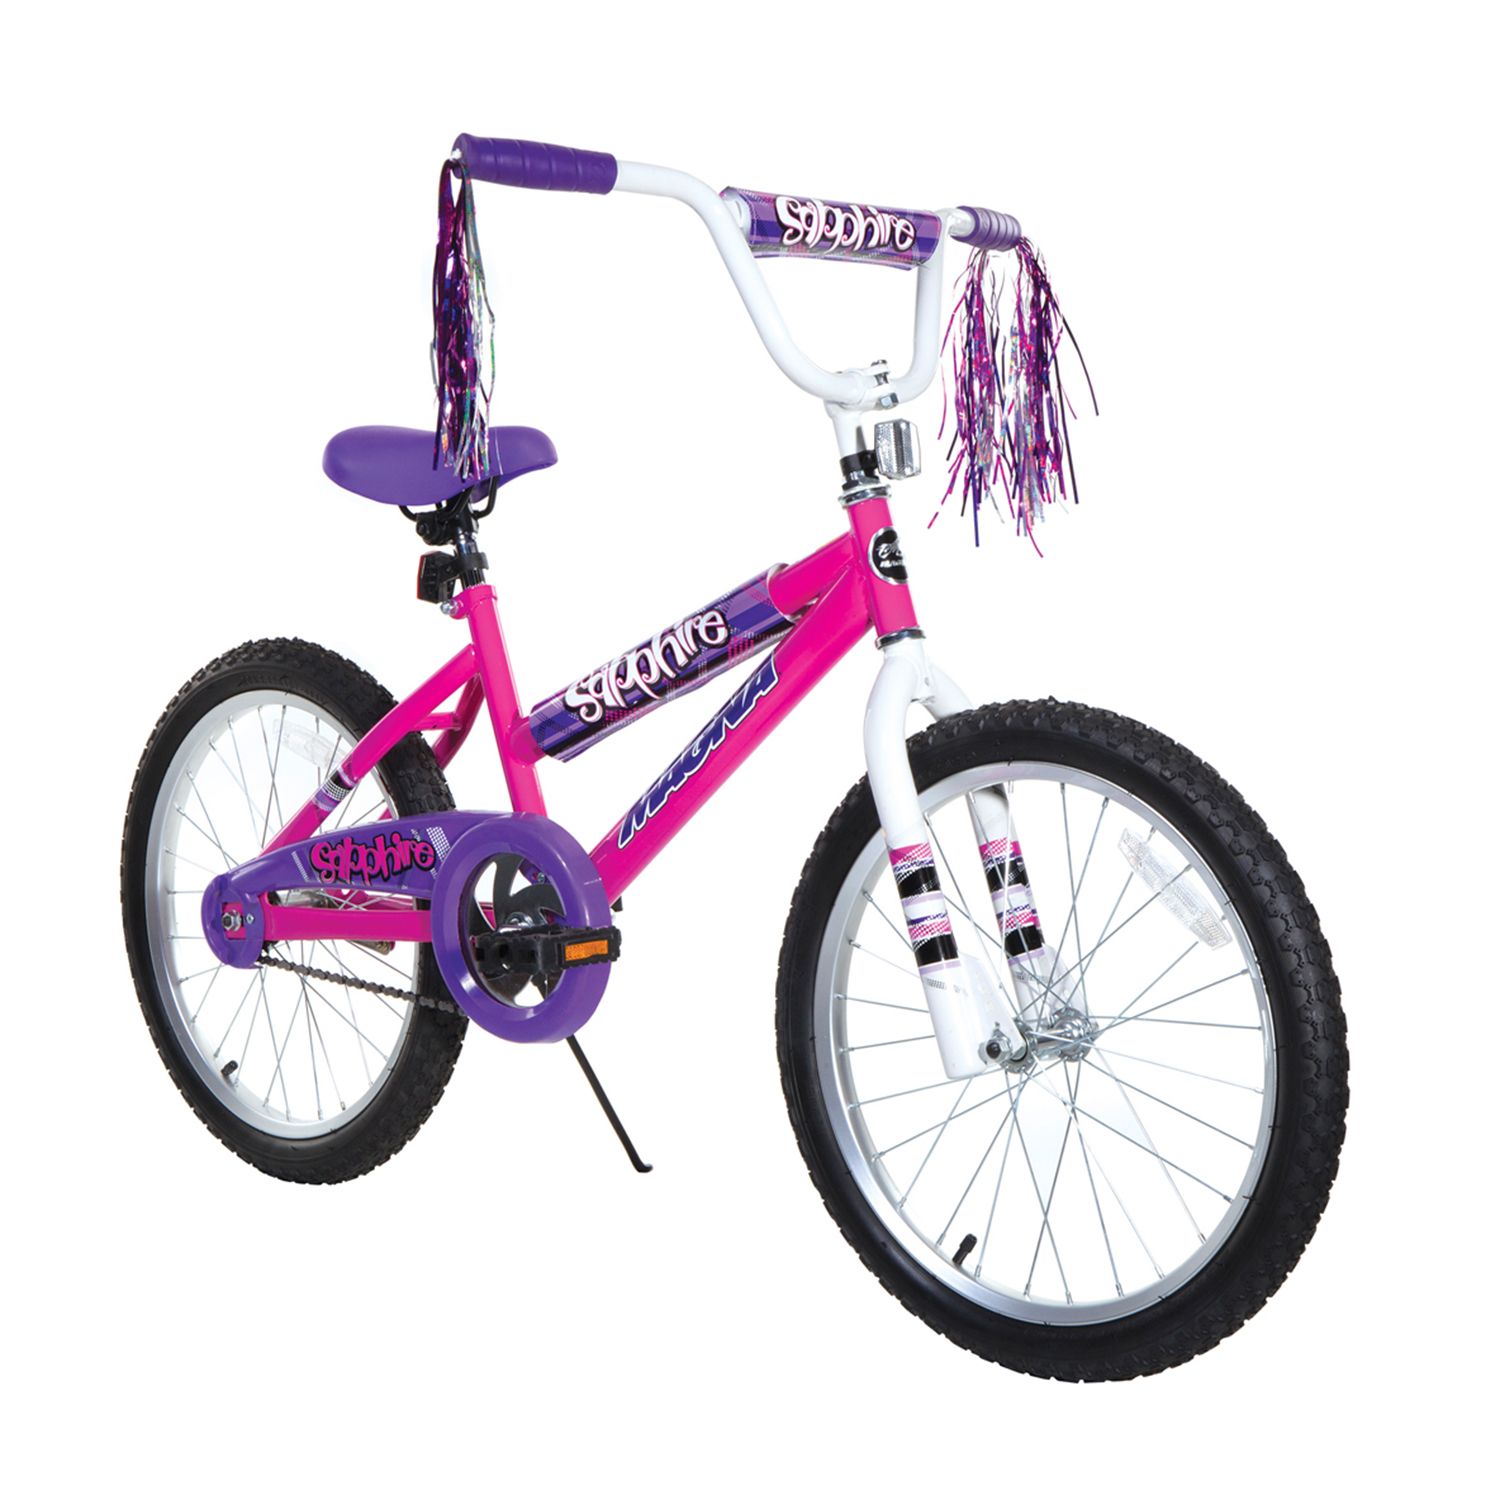 bmx bicycle for girl